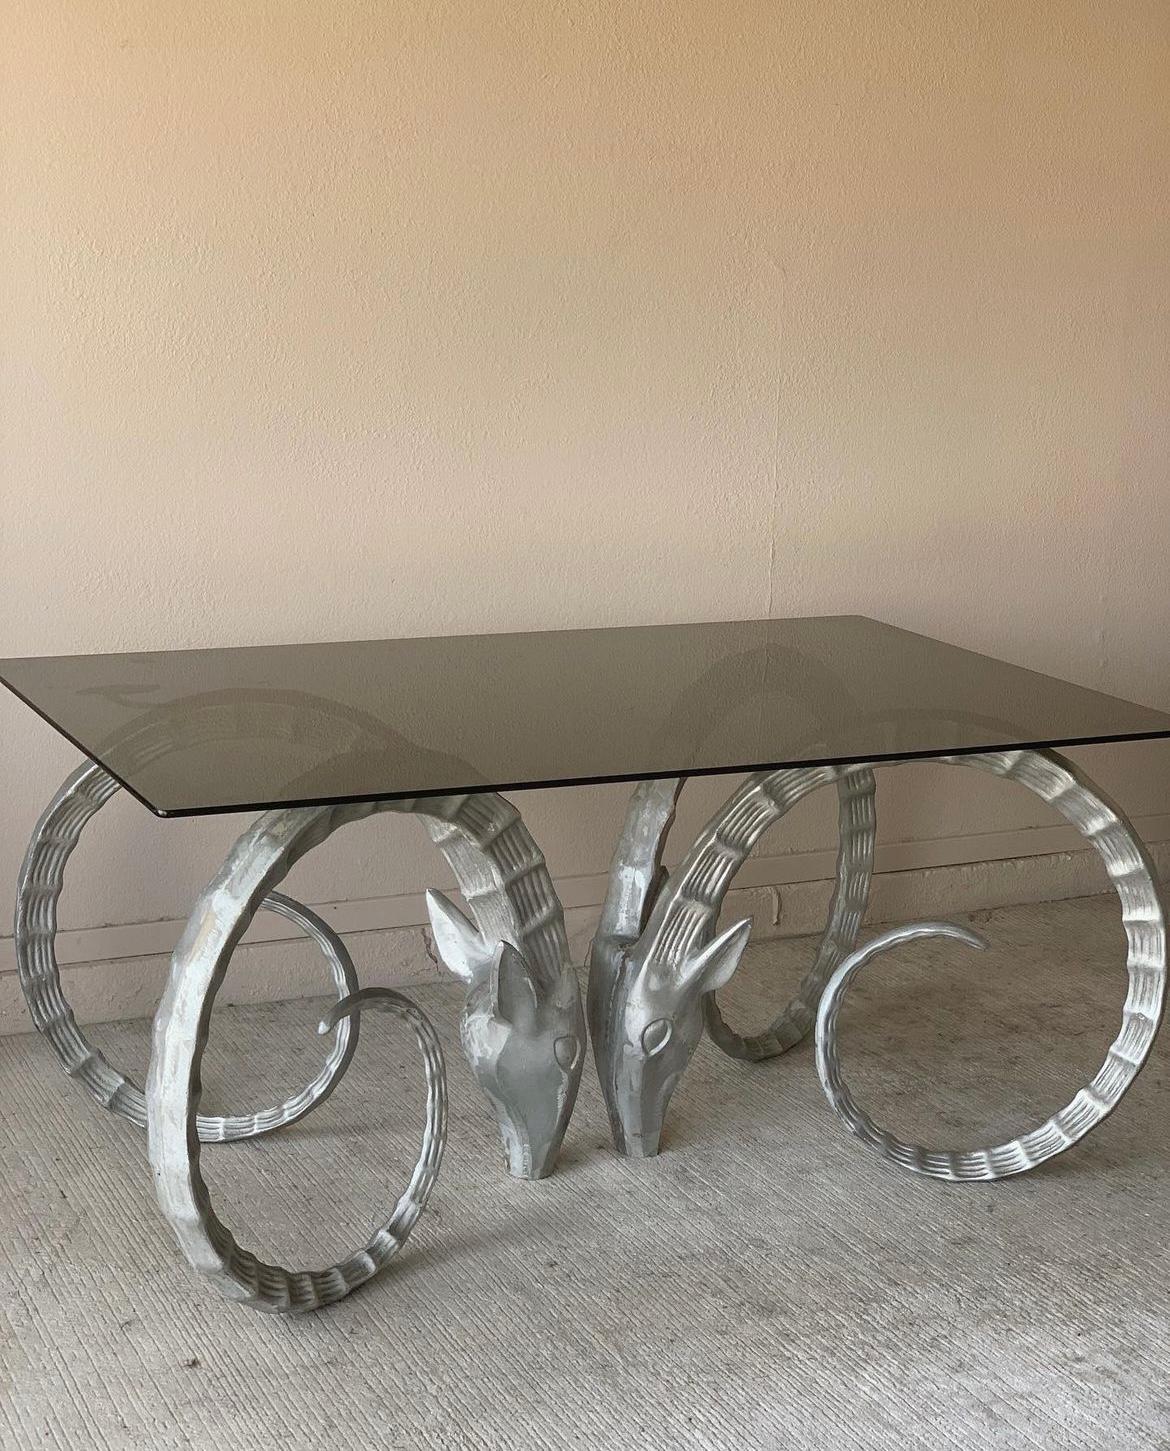 Iconic pair of Ibex Ram table bases after Alain Chervet.  Aluminum material with cast marks visible from some angles. A seductively raw look into the artist's process within the finished product.

Extremely heavy pieces that will support a glass,